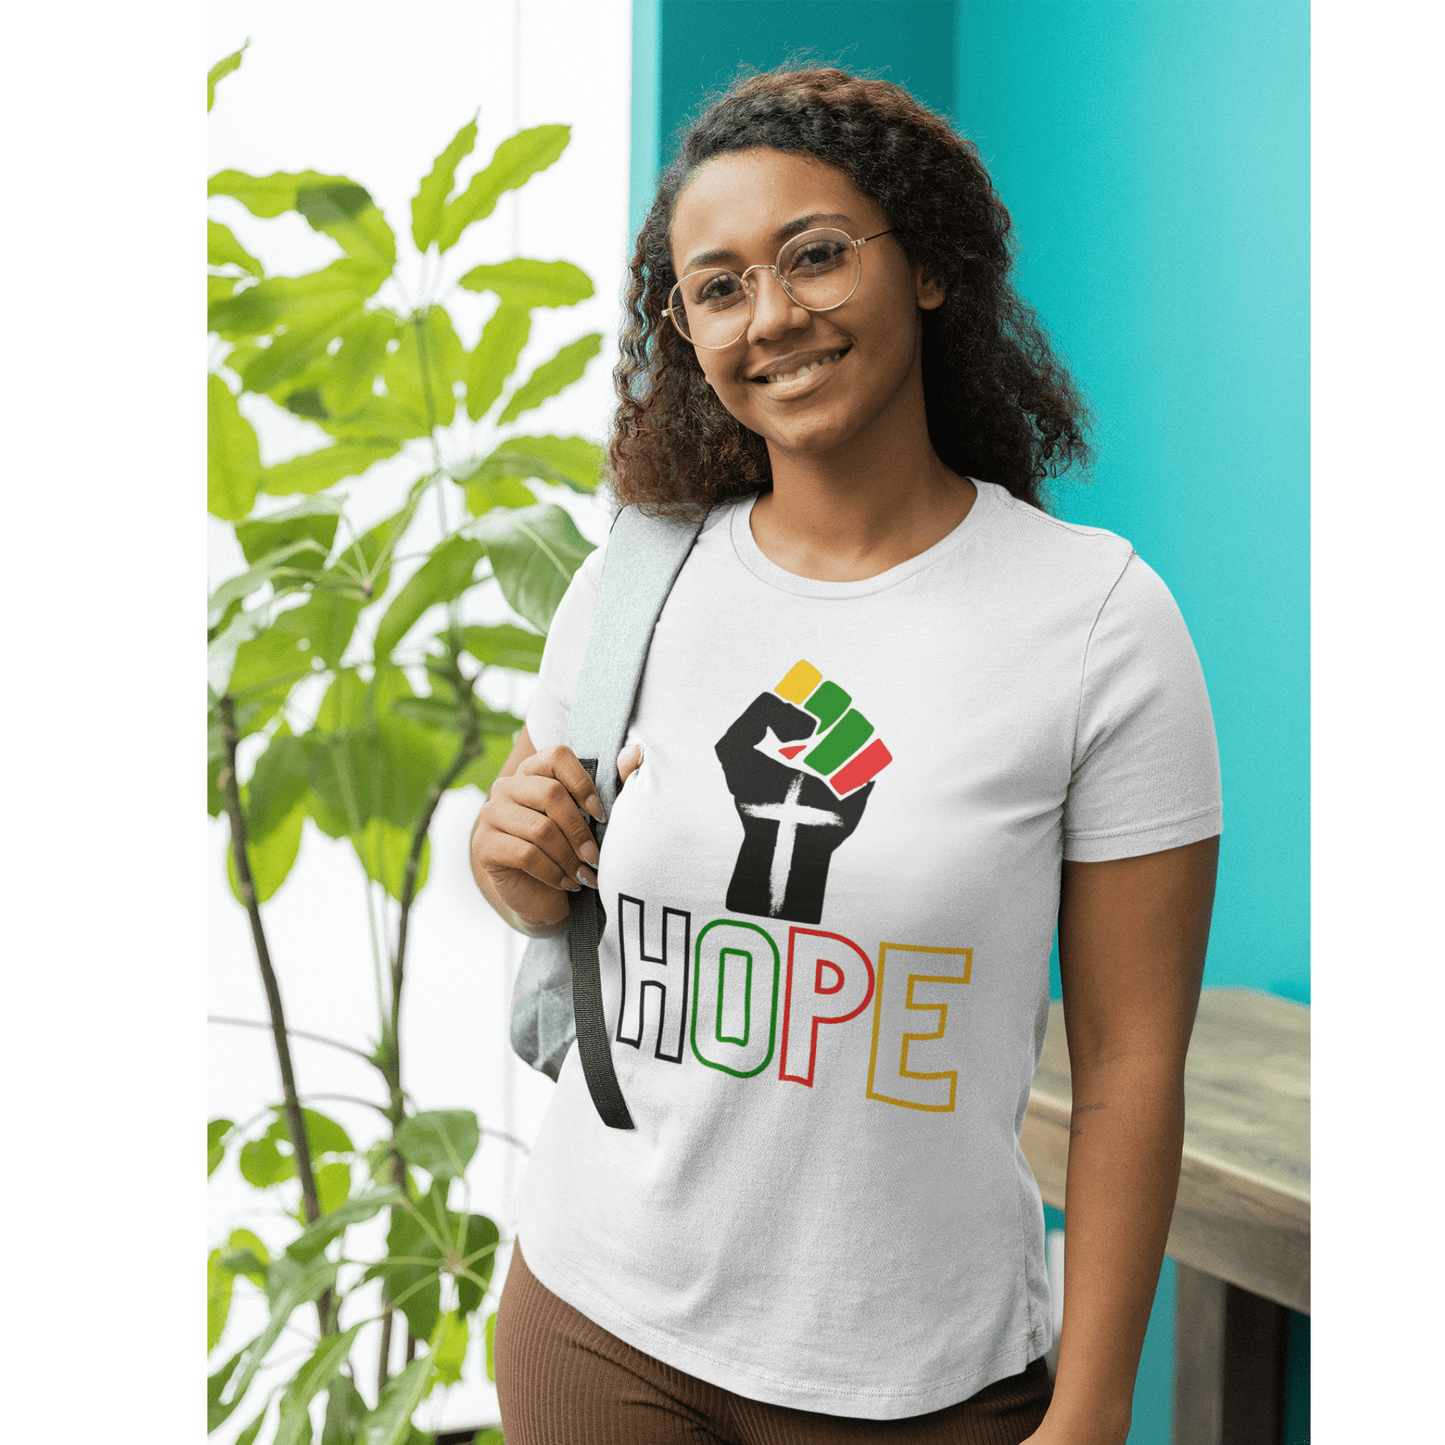 HOPE Faith and Empowerment (Graphic Colorful Text and Empowerment Hand) Unisex Jersey Short Sleeve Tee - Style: Bella+Canvas 3001